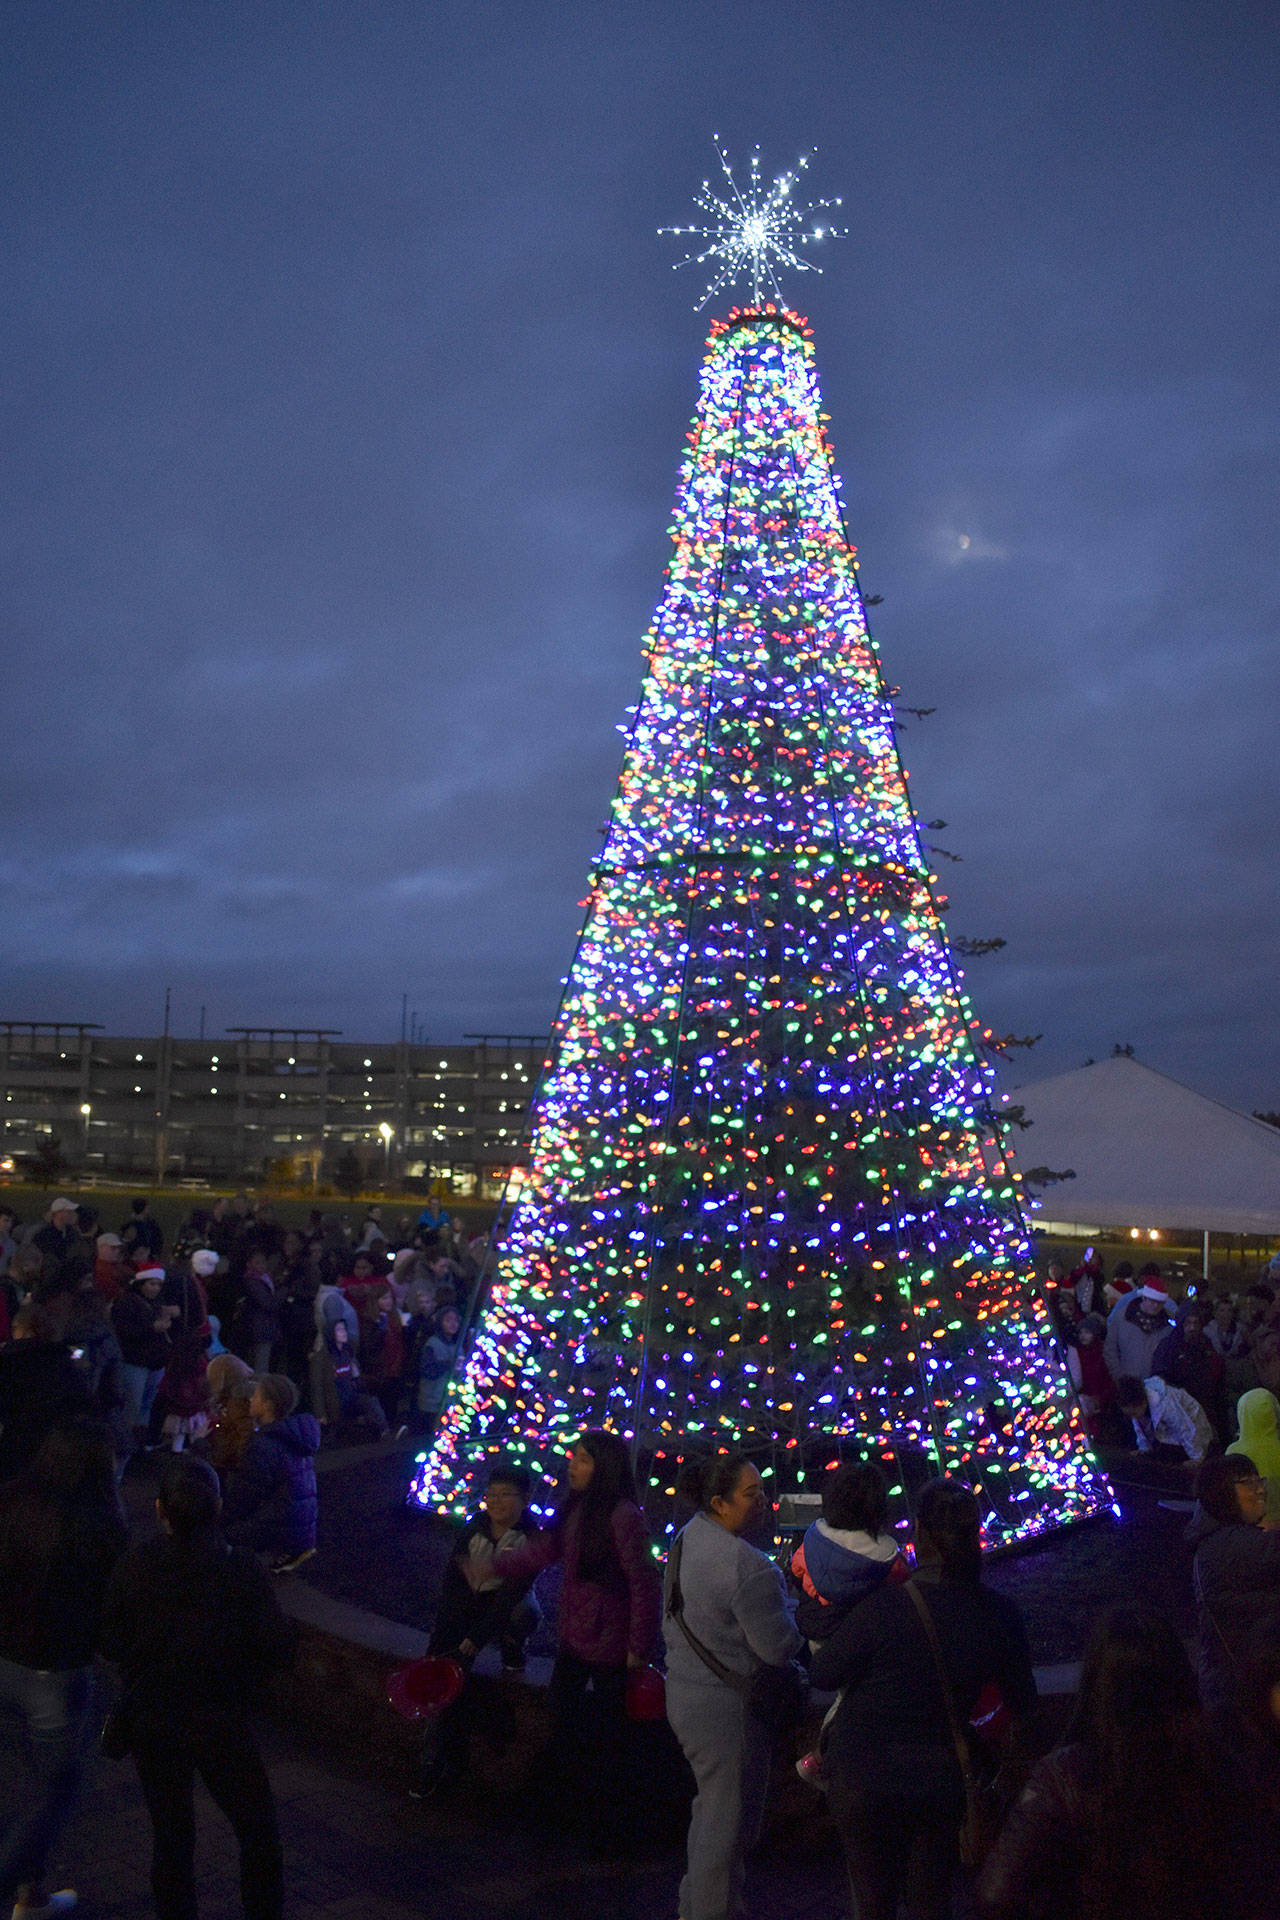 A large crowd gathers at Town Square Park to see the Christmas tree lit up to celebrate this holiday season. Haley Donwerth/staff photo